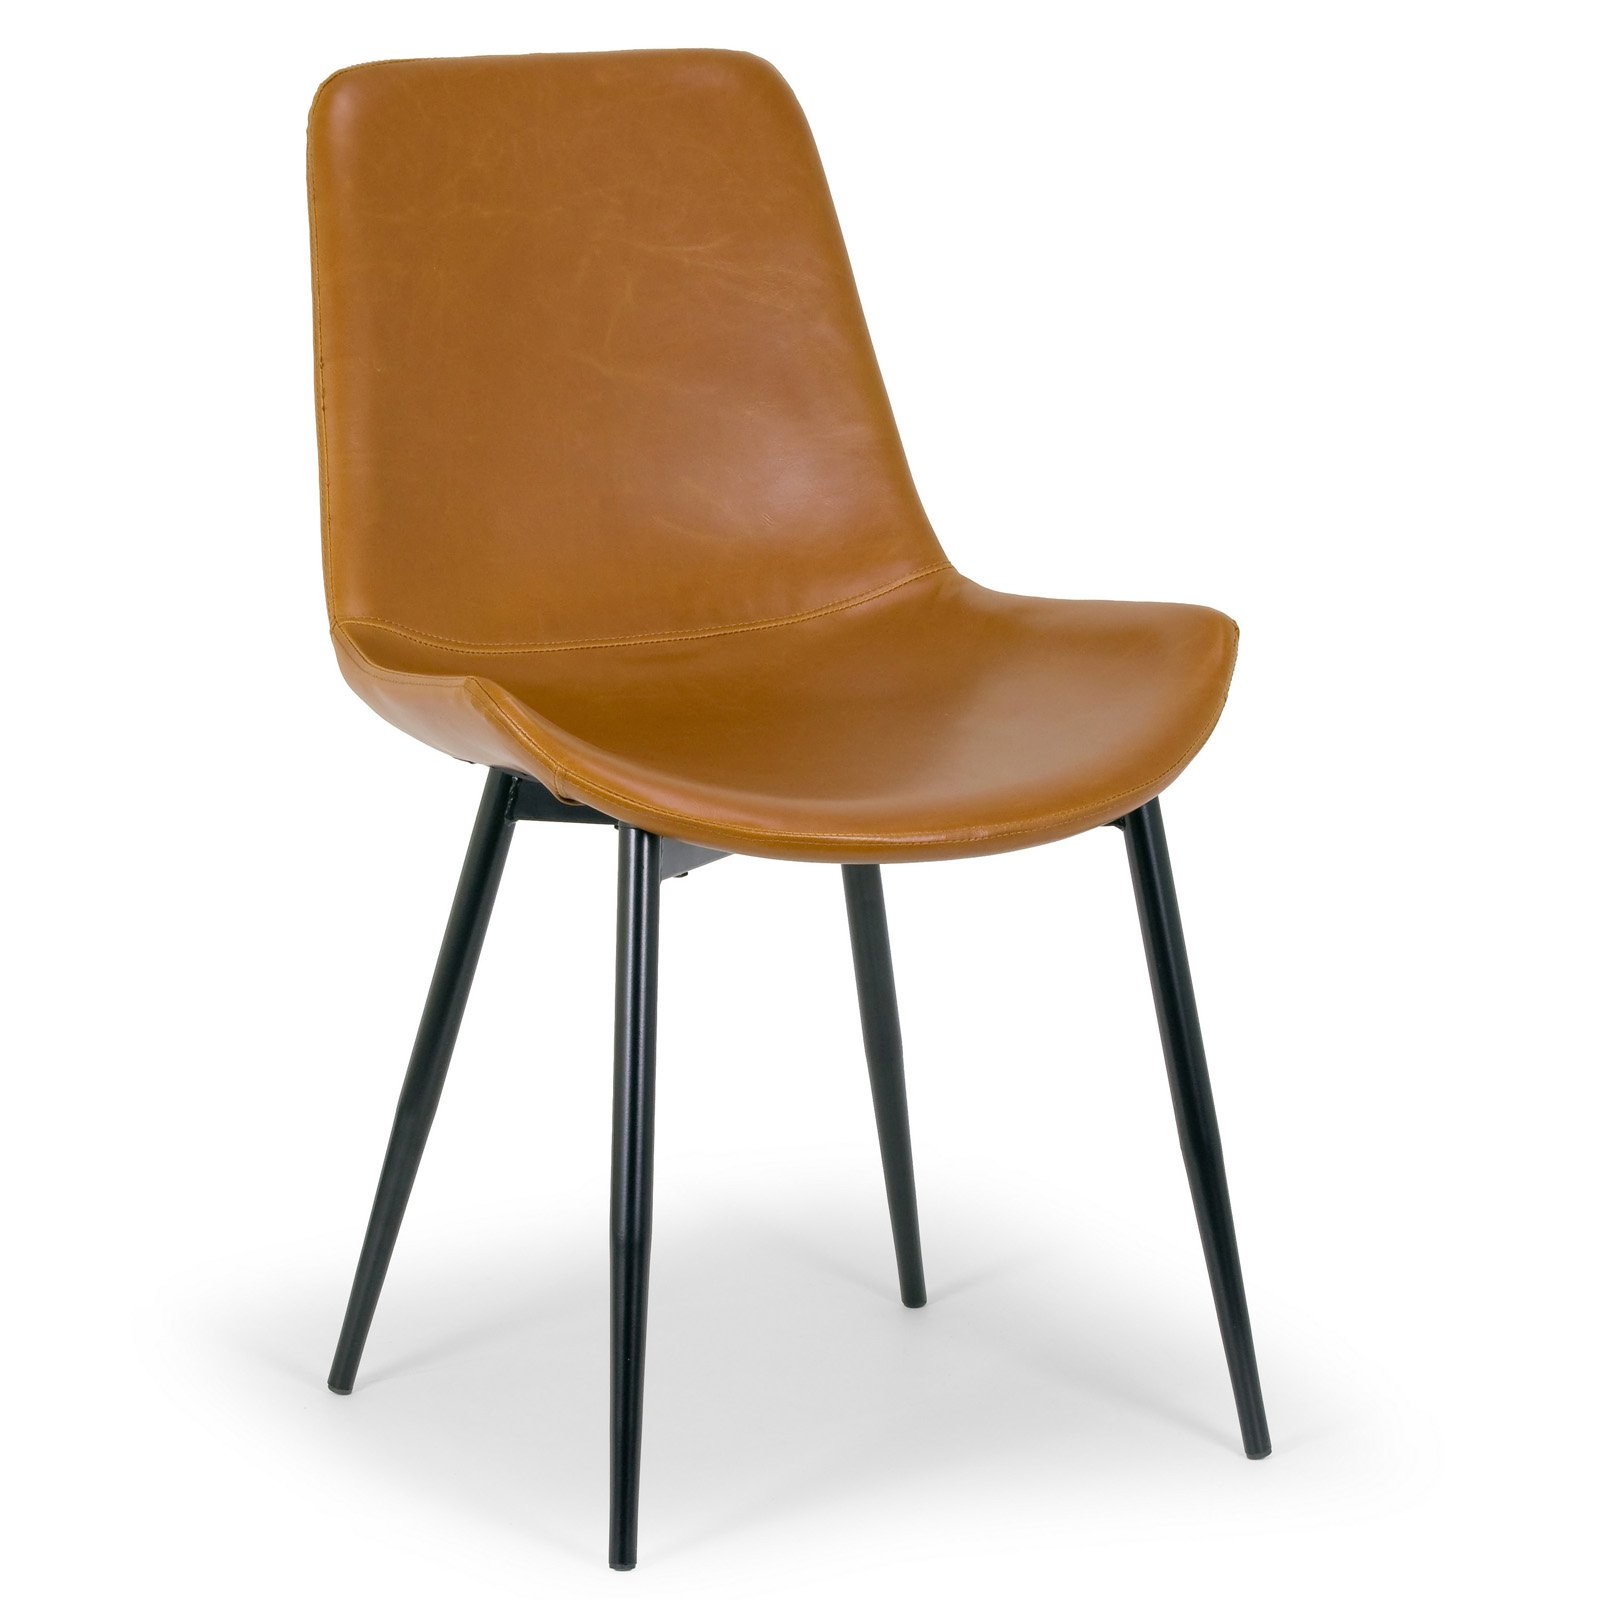 Set of 2 Alary Caramel Brown Faux Leather Modern Dining Chair with Black Iron Legs - image 2 of 6